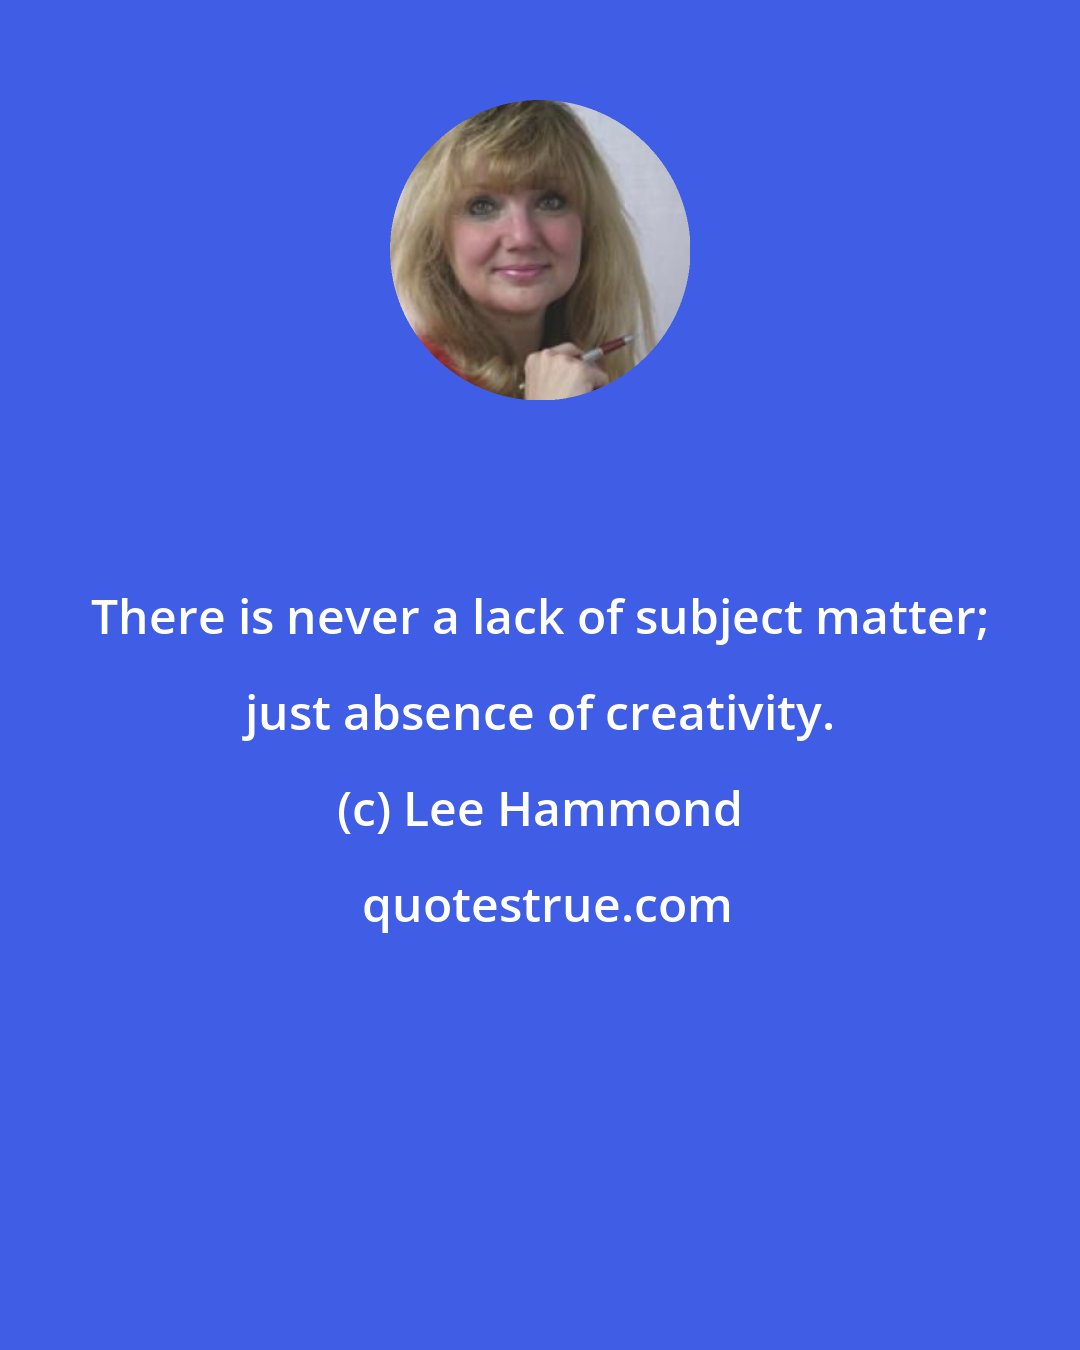 Lee Hammond: There is never a lack of subject matter; just absence of creativity.